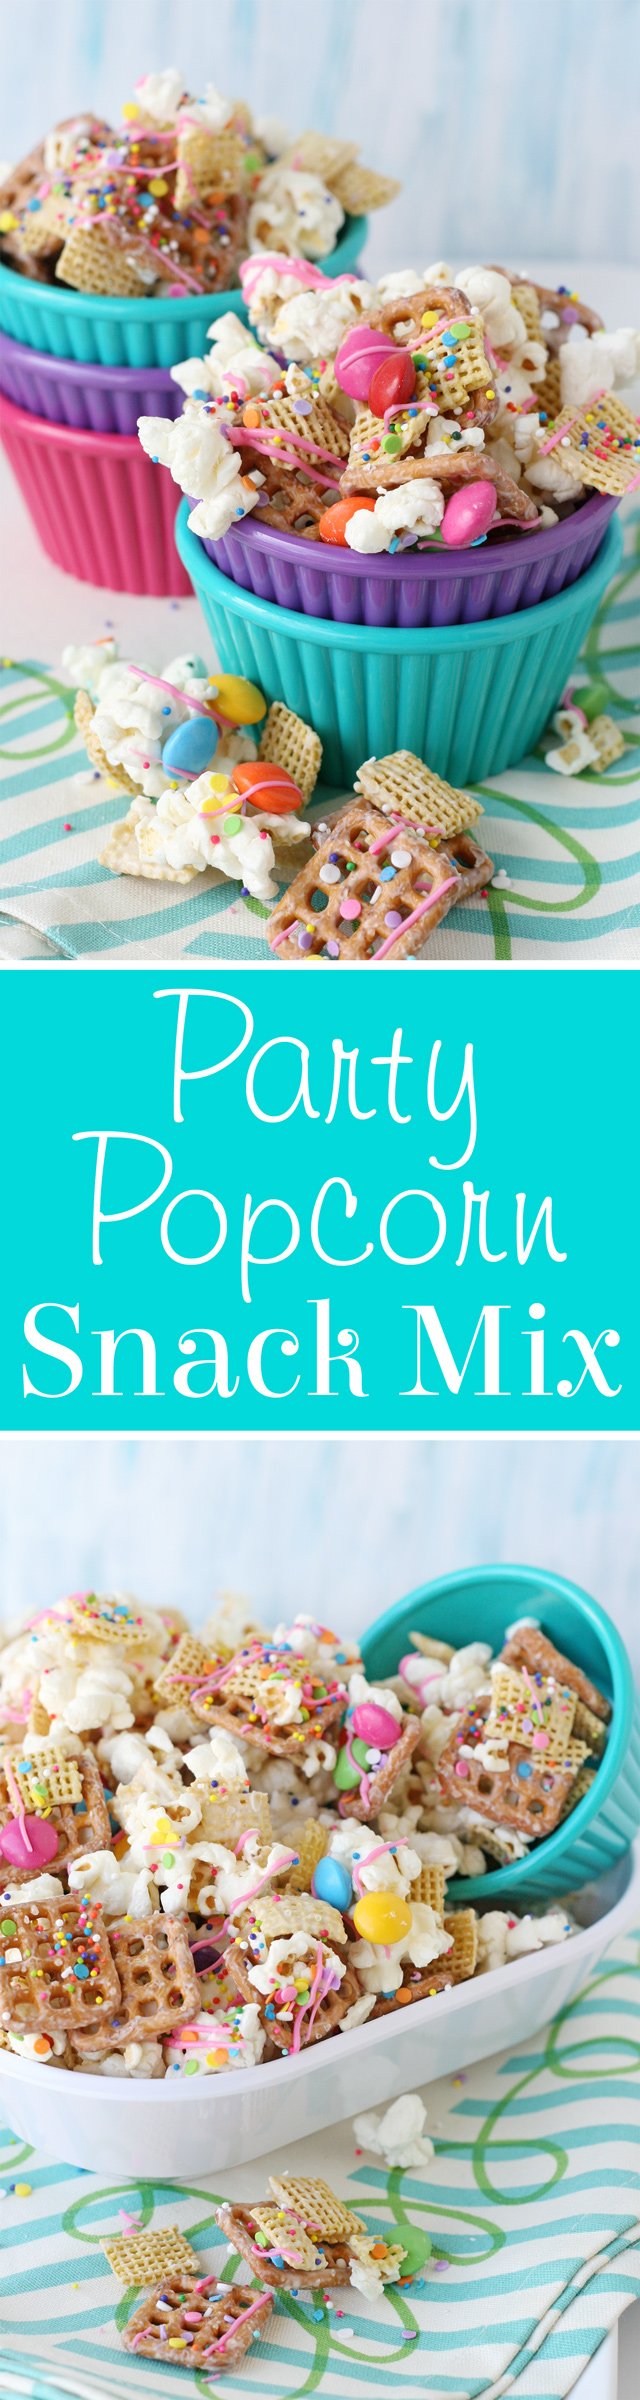 Simply the BEST Party Snack Mix!